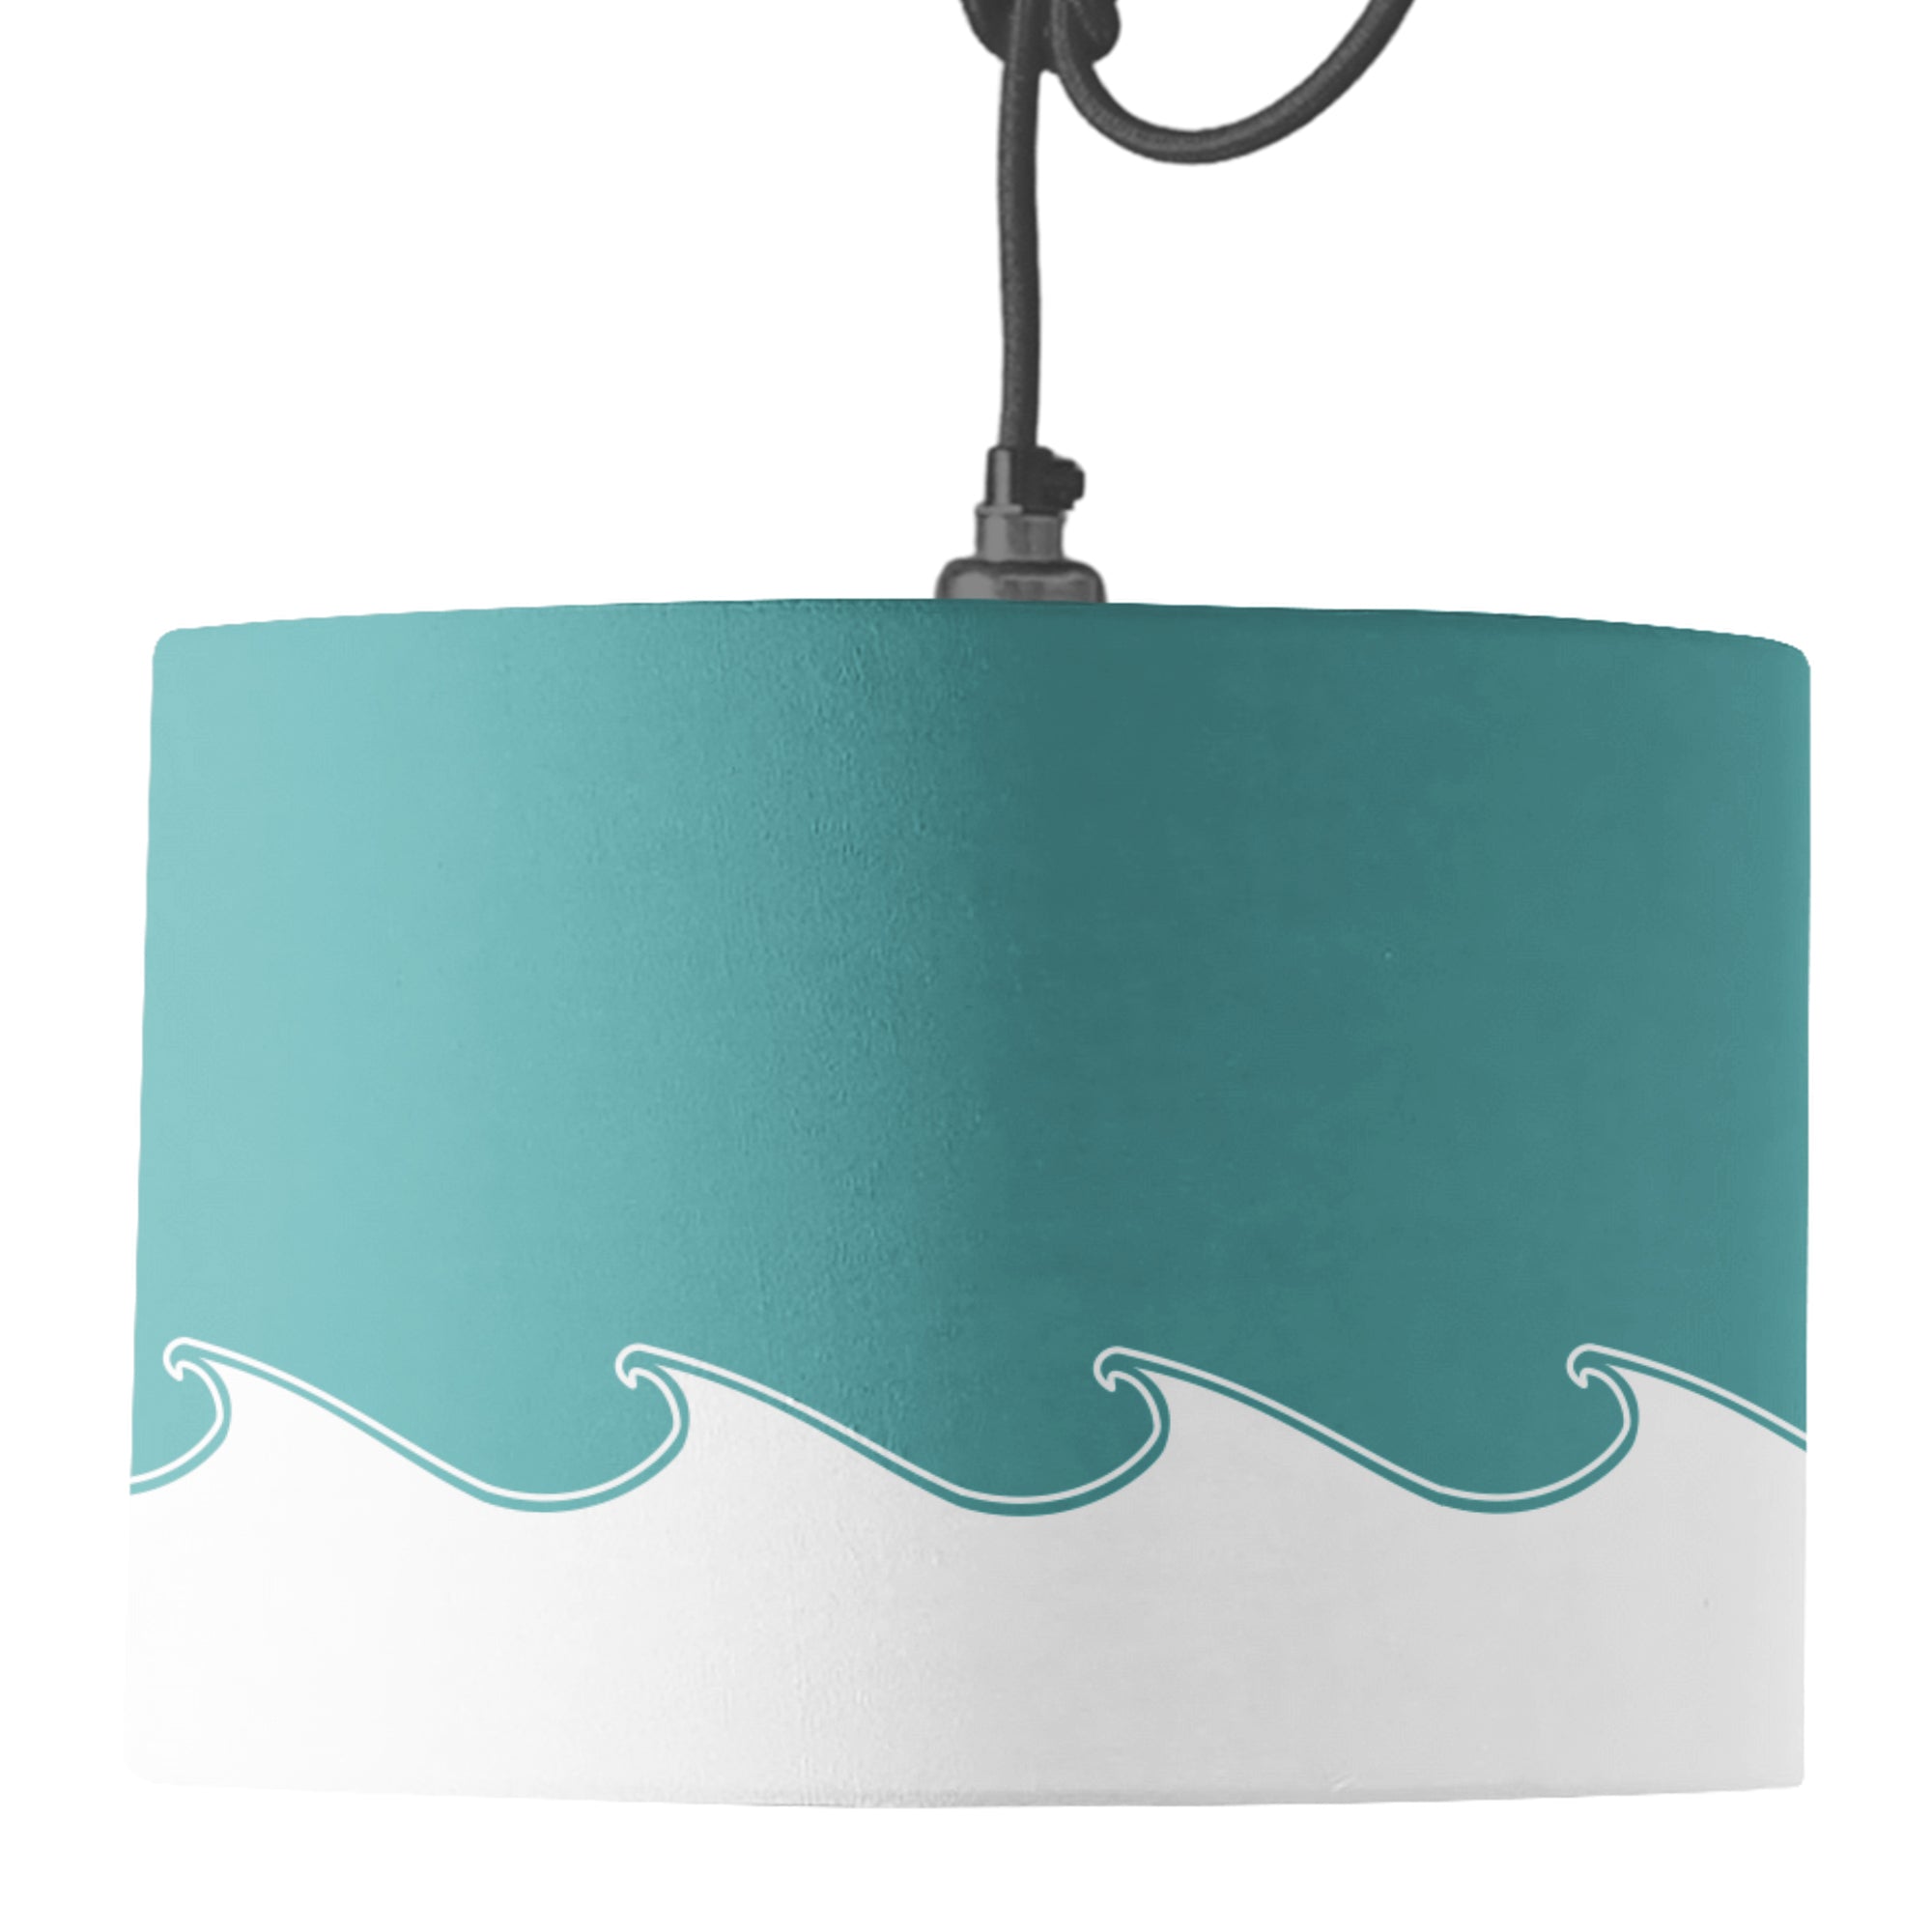 Pendant lampshade dressed with a drum lampshade featuring a vintage white wave design on sea green background.